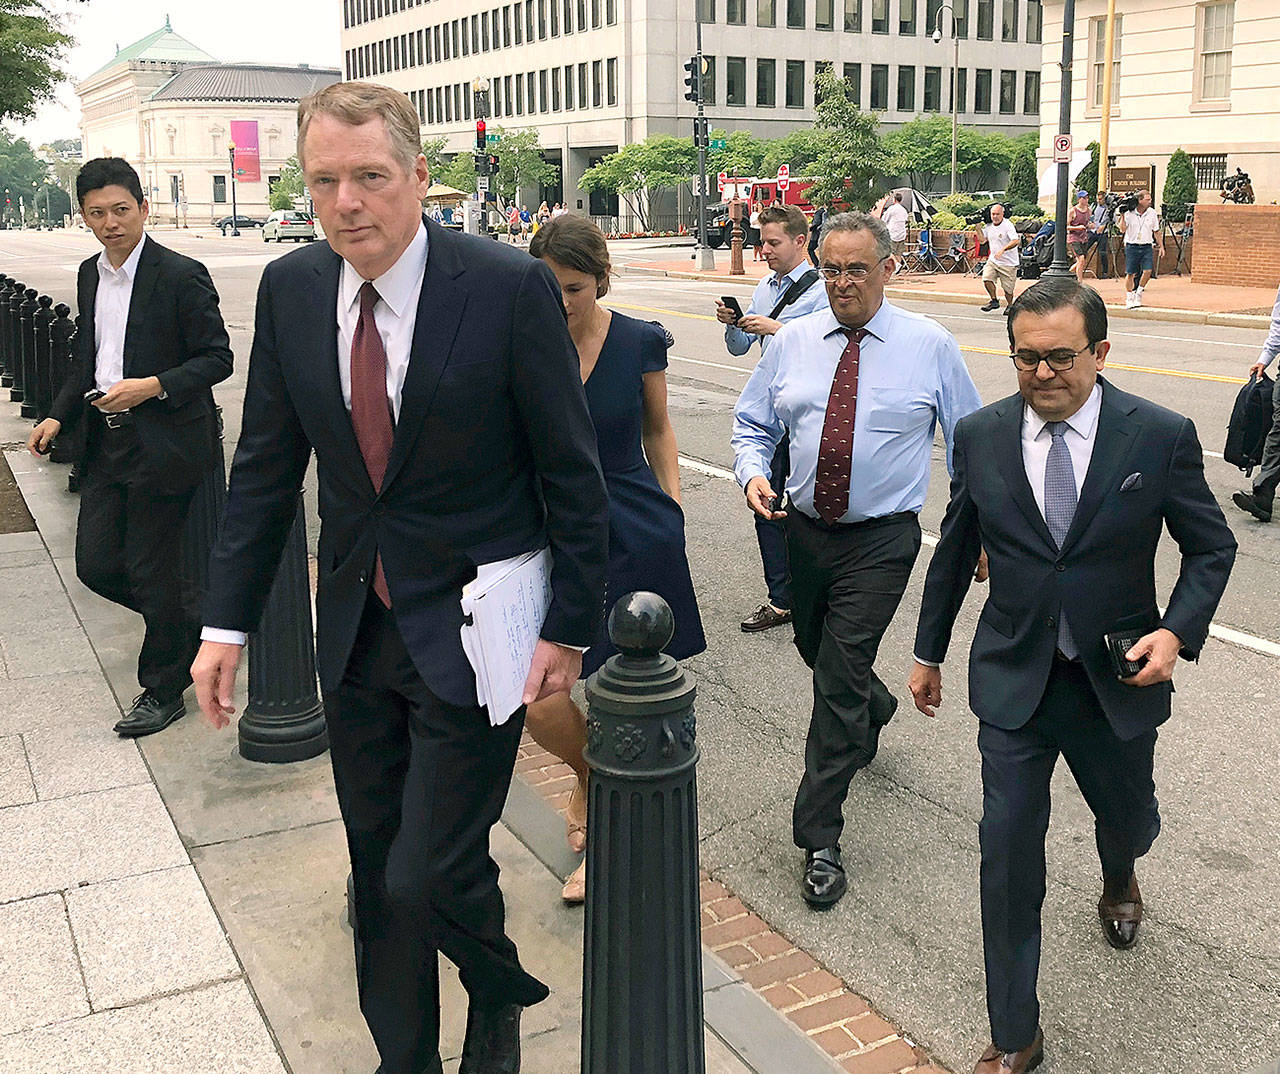 U.S. Trade Representative Robert Lighthizer (front left) and Mexican Secretary of Economy Idelfonso Guajardo (front right) walk to the White House on Monday. (AP Photo/Luis Alonso Lugo)